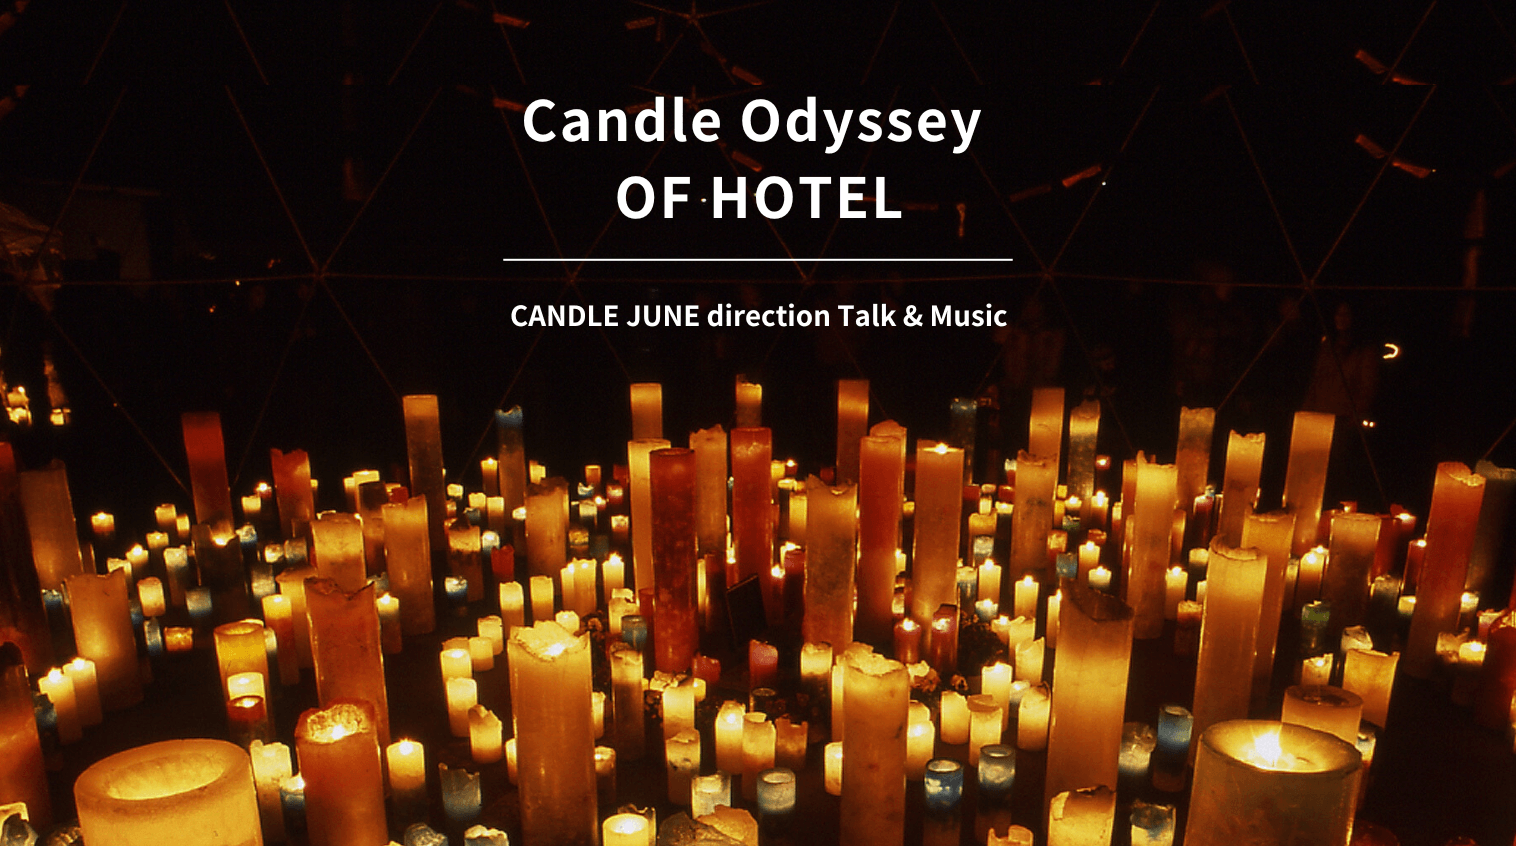 Candle Odyssey OF HOTEL｜CANDLE JUNE direction Talk & Music